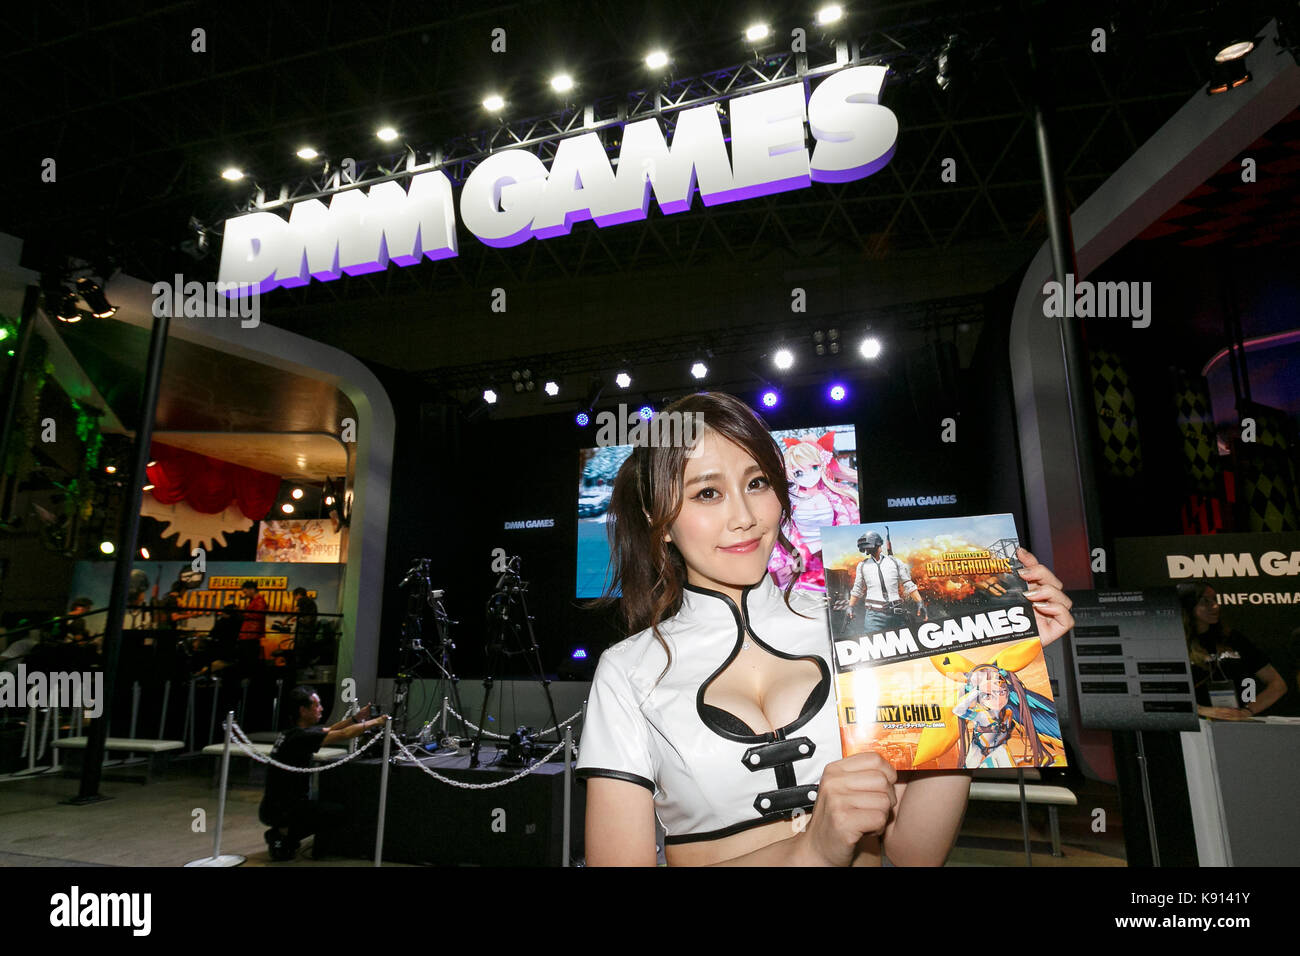 Chiba, Japan. 21st Sep, 2017. A booth assistant poses for a photograph during the Tokyo Game Show (TGS 2017) on September 21, 2017, Chiba, Japan. This year's event hosts 609 companies from 36 different countries, introducing 1,317 video game titles for smartphones, games consoles, VR, AR and MR platforms. The show, which expects to attract 250,000 visitors, runs until September 24 at the International Convention Complex Makuhari Messe in Chiba; and will be streamed live around the world. Credit: Rodrigo Reyes Marin/AFLO/Alamy Live News Stock Photo